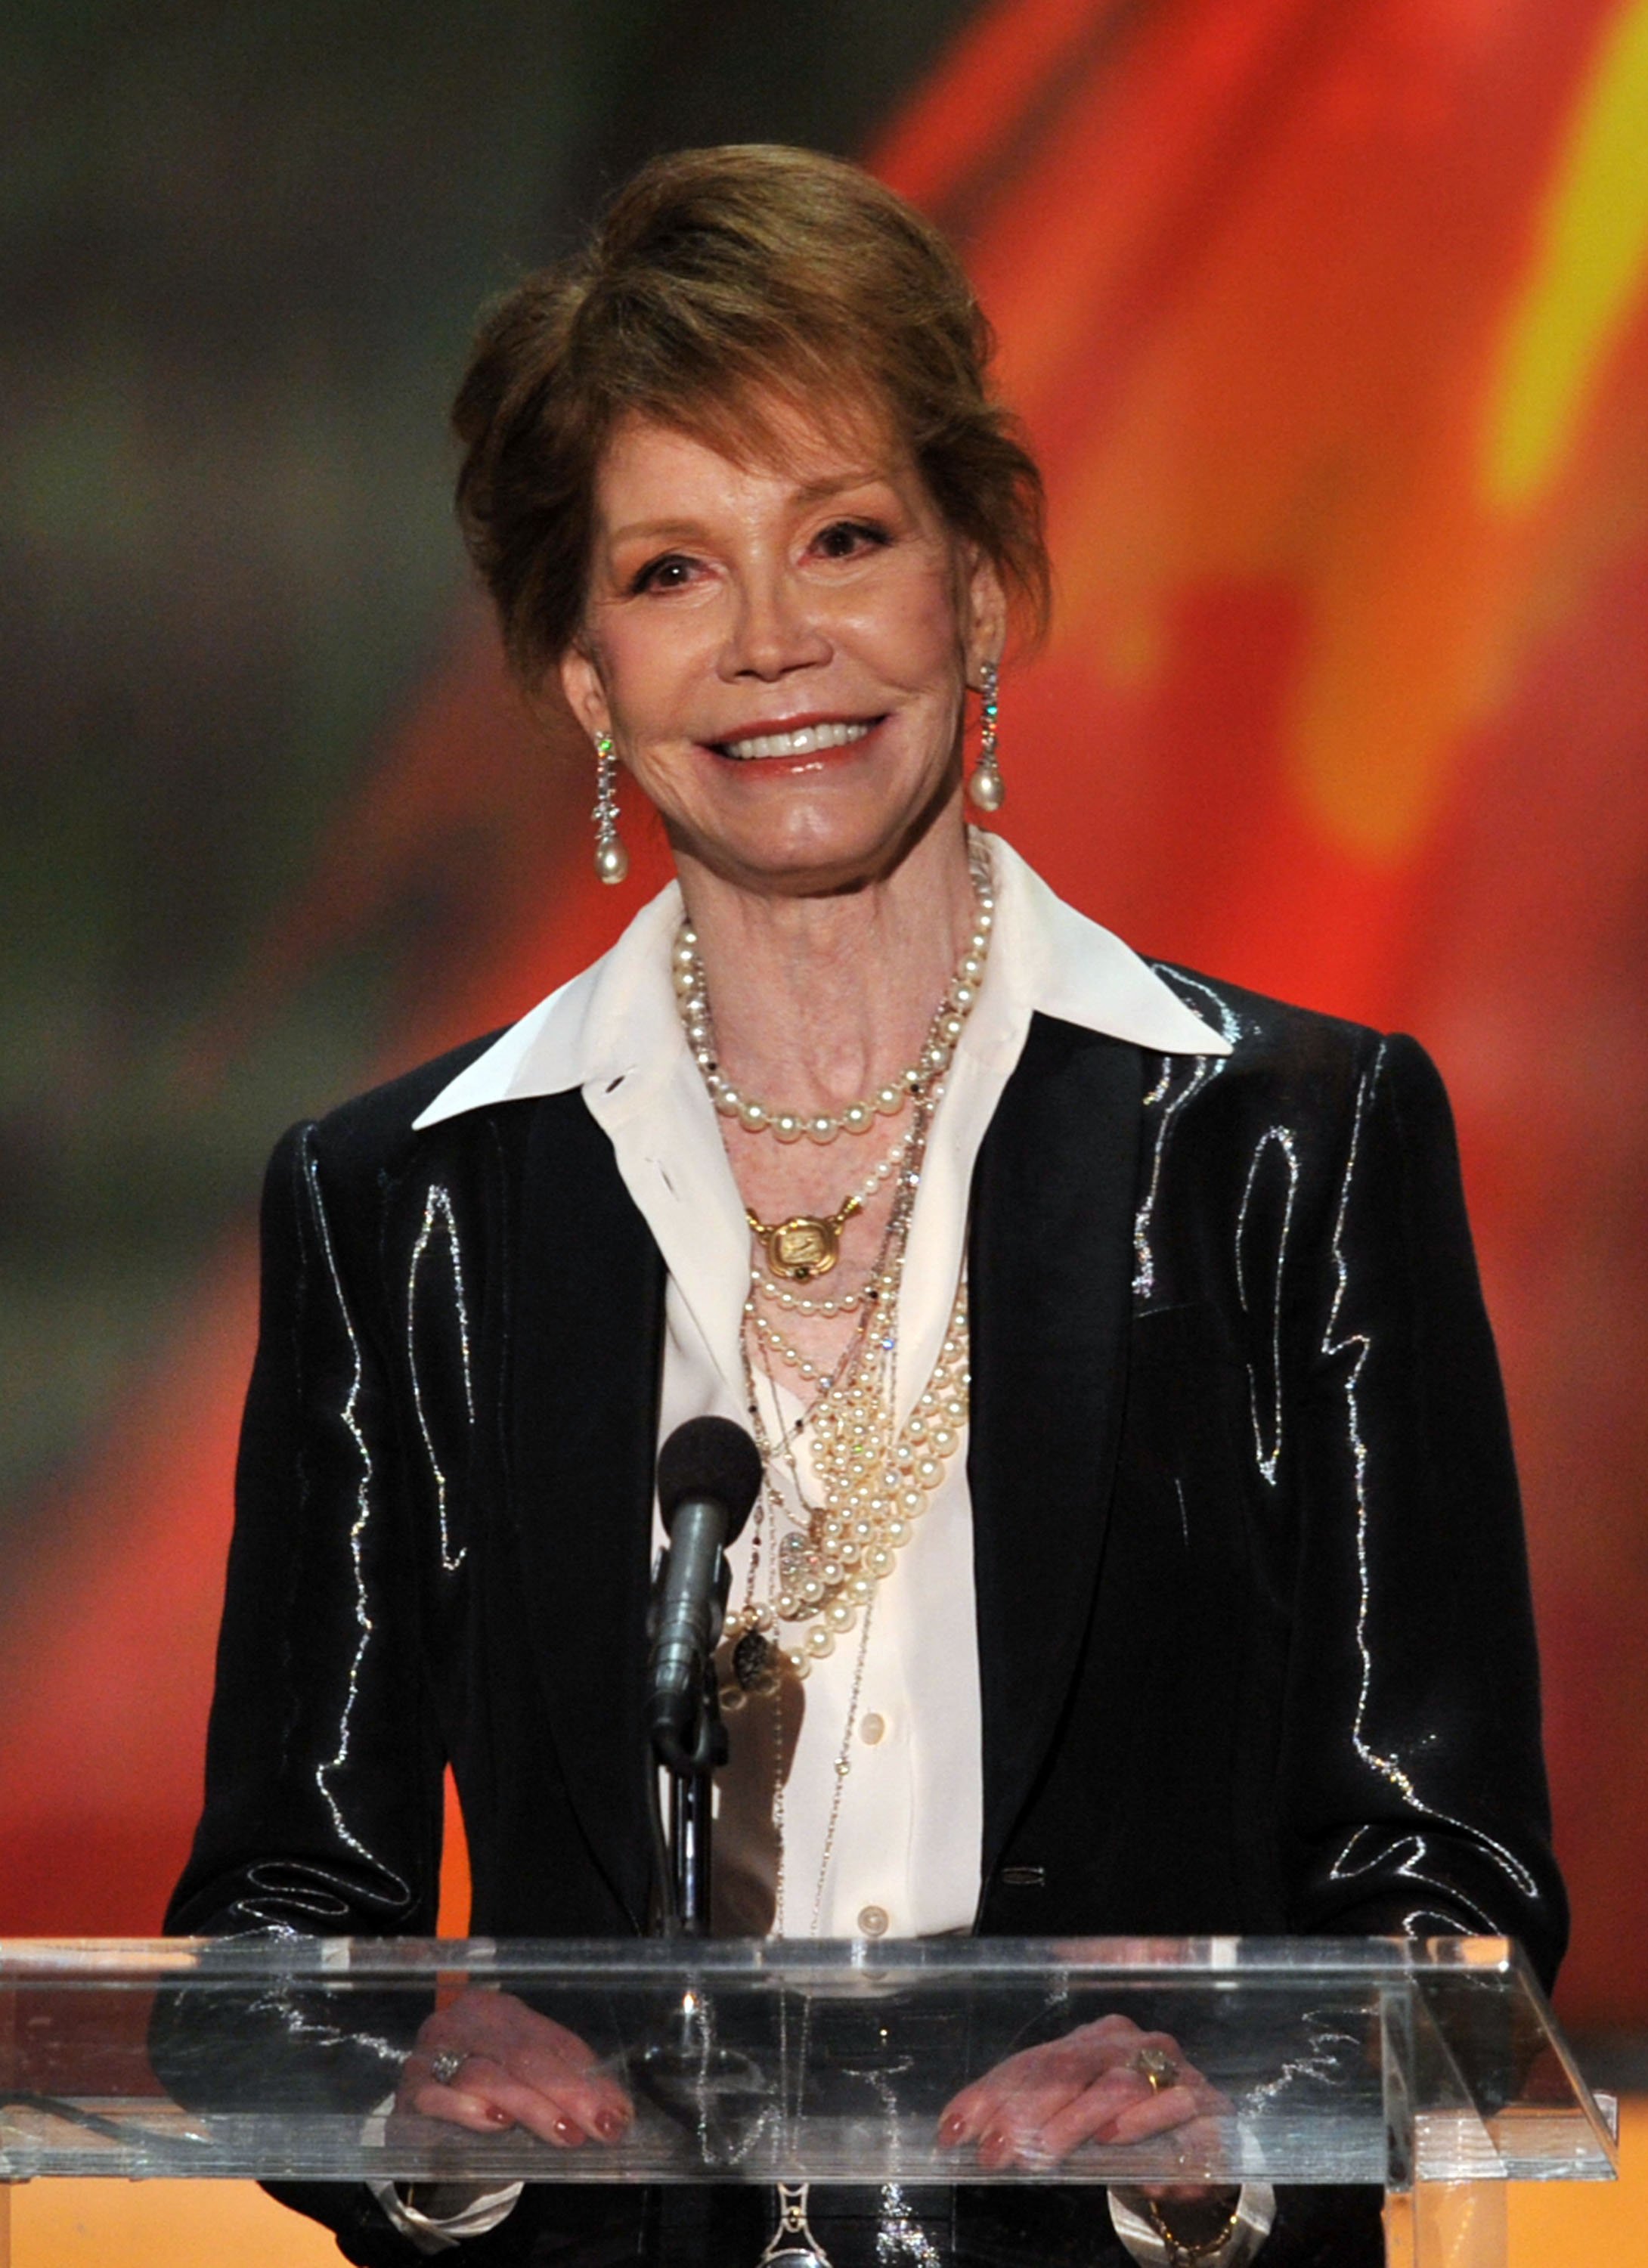 Photos: Mary Tyler Moores Fashion Through the Years